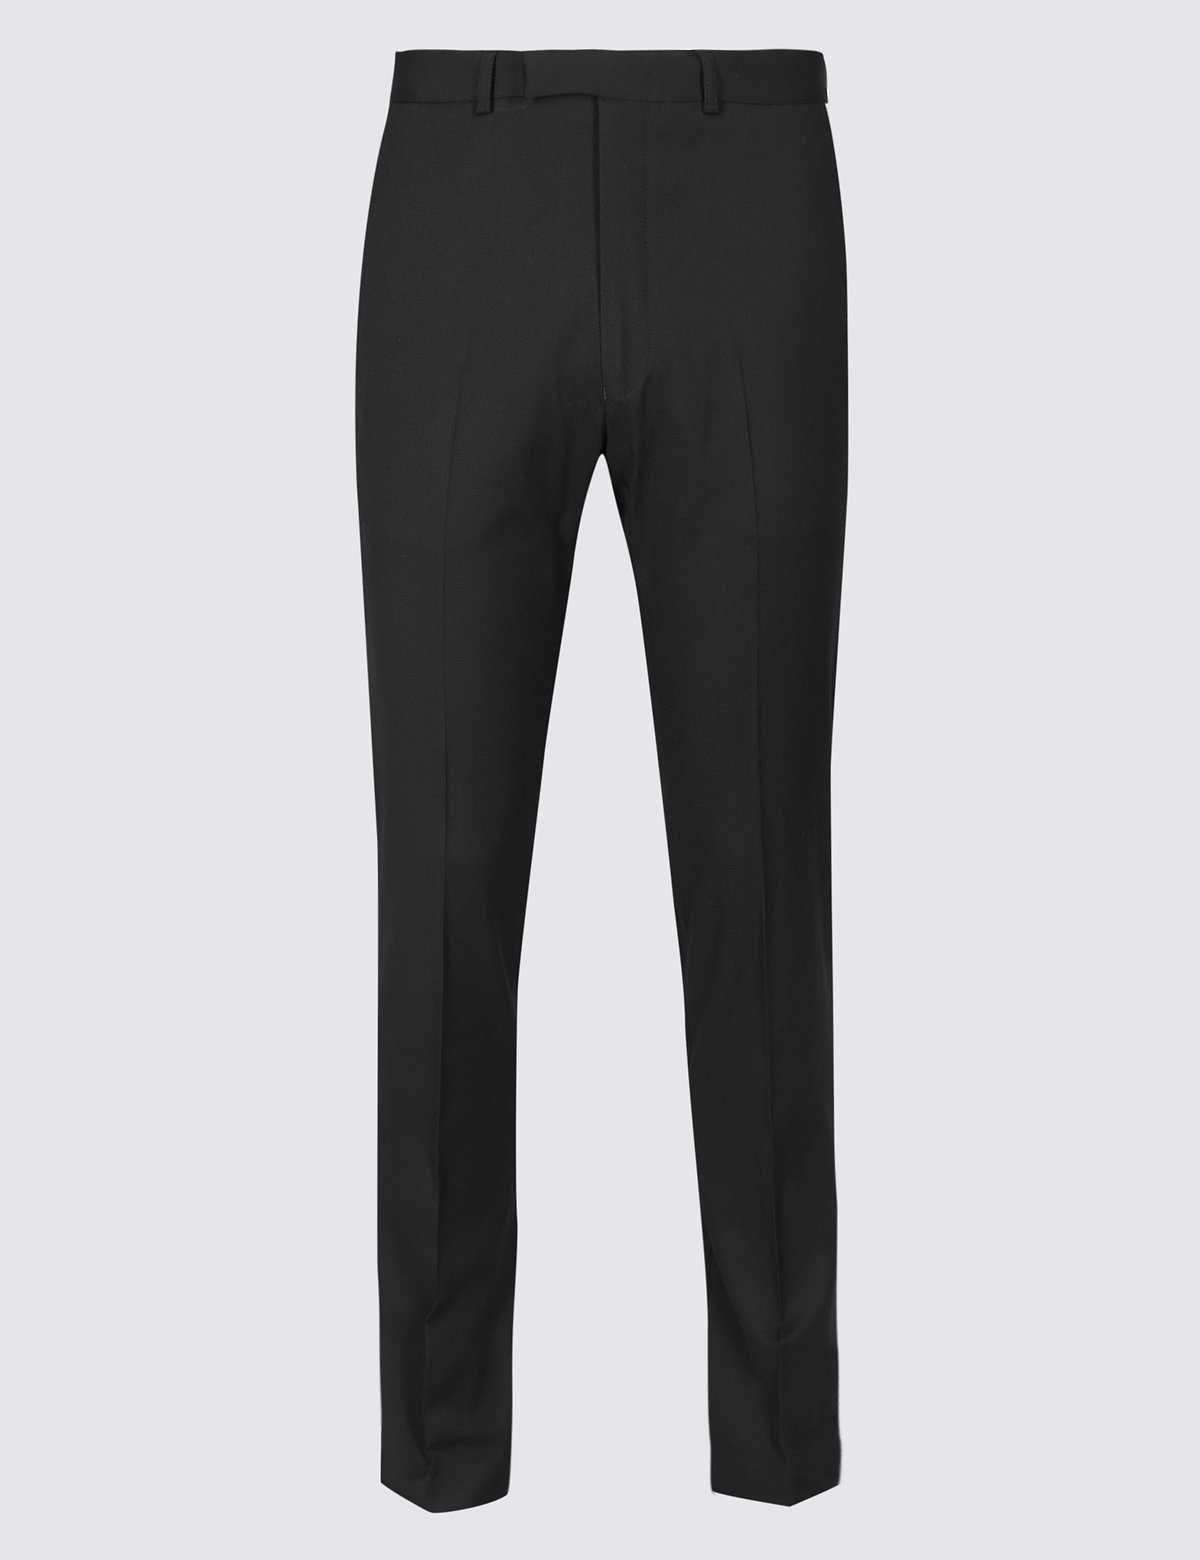 Black Textured Skinny Fit Trousers